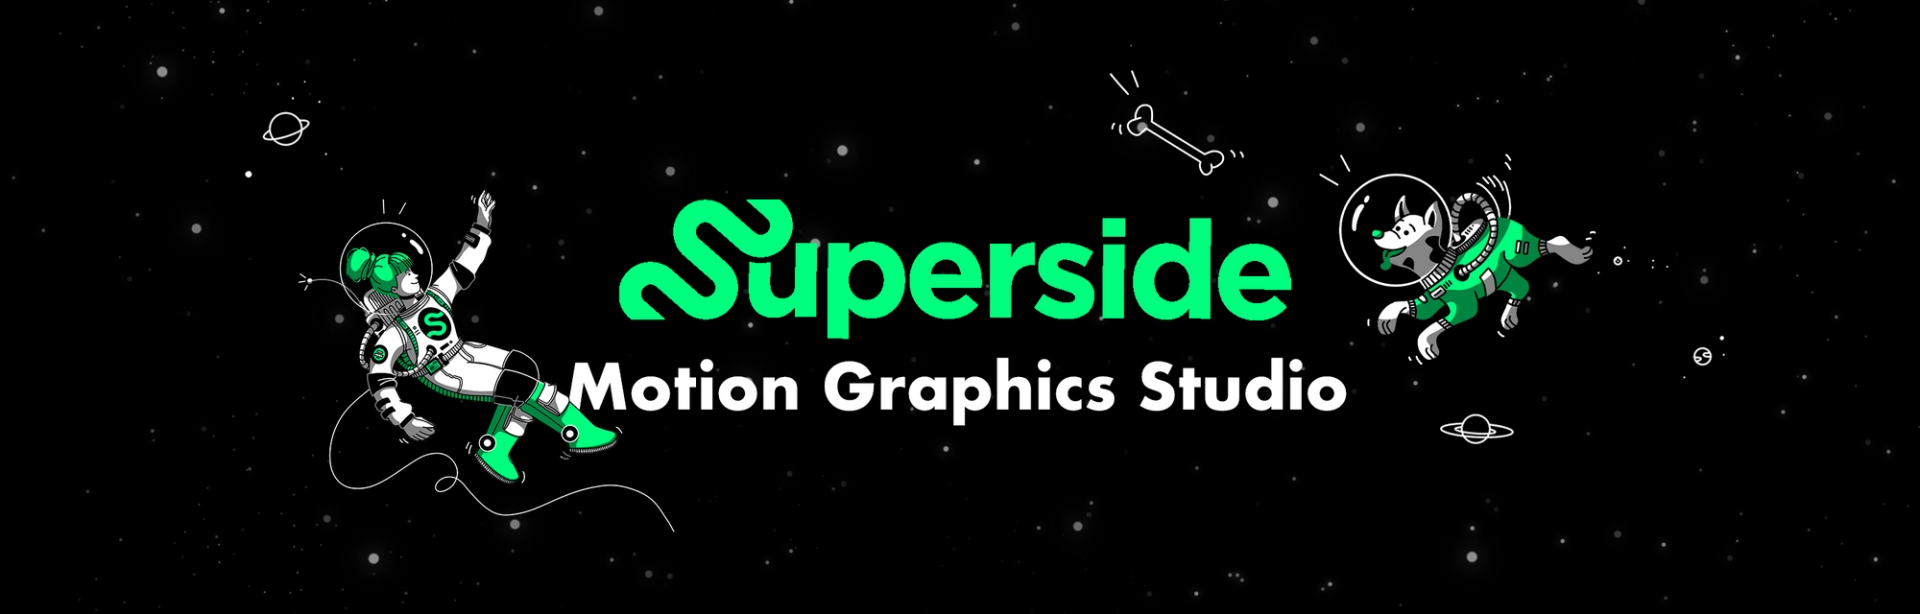 Superside Update: Motion Graphics Studio is Now Out of Beta